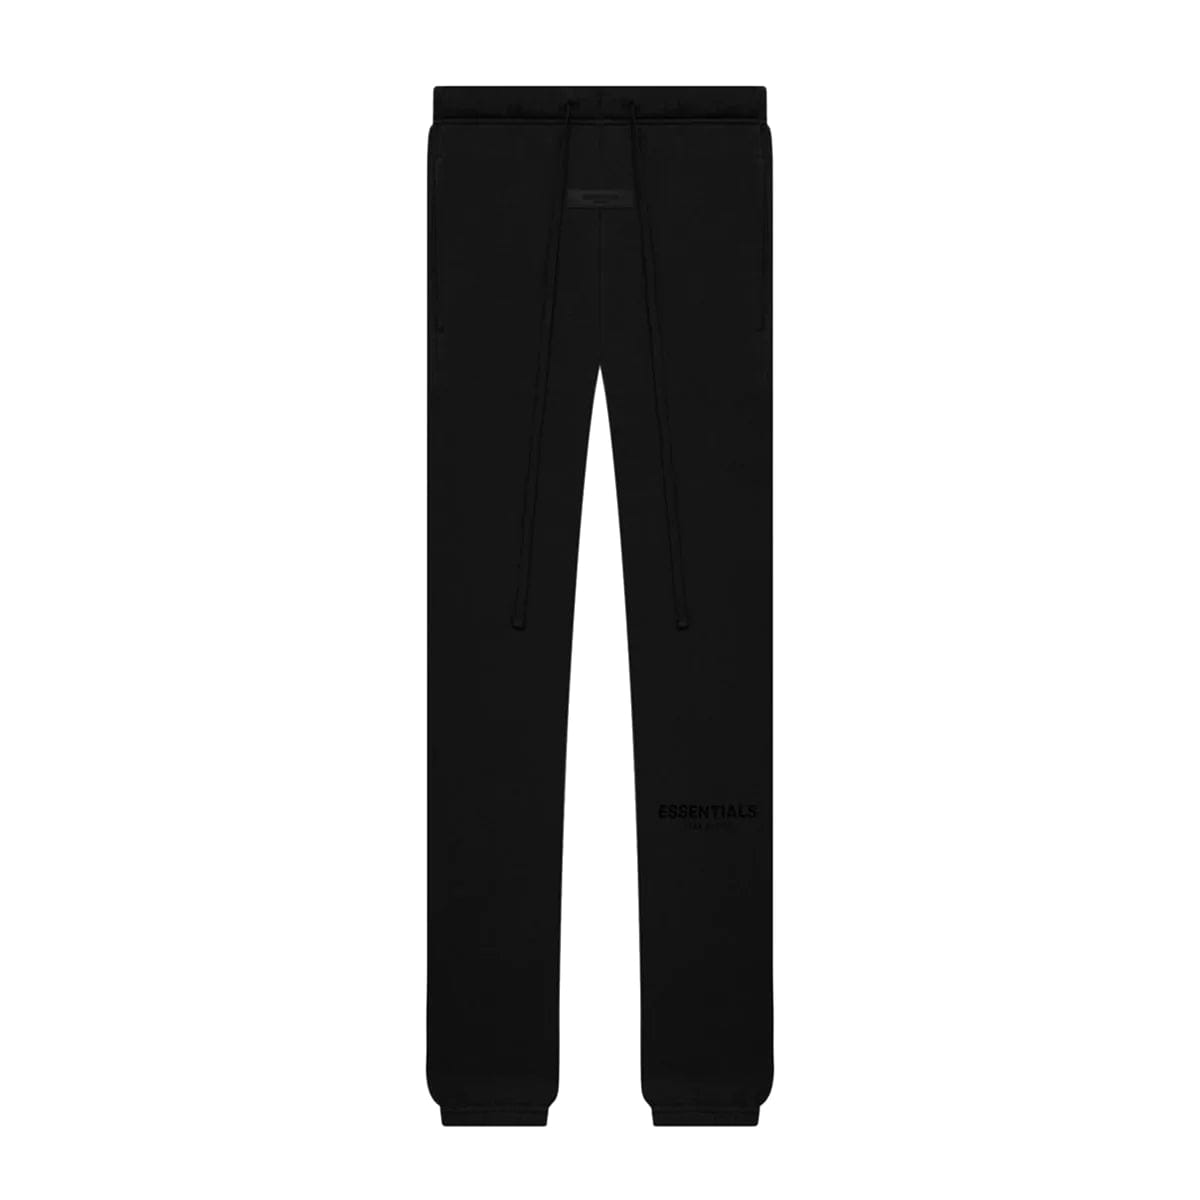 Fear of God Essentials Sweatpants Stretch Limo SS22